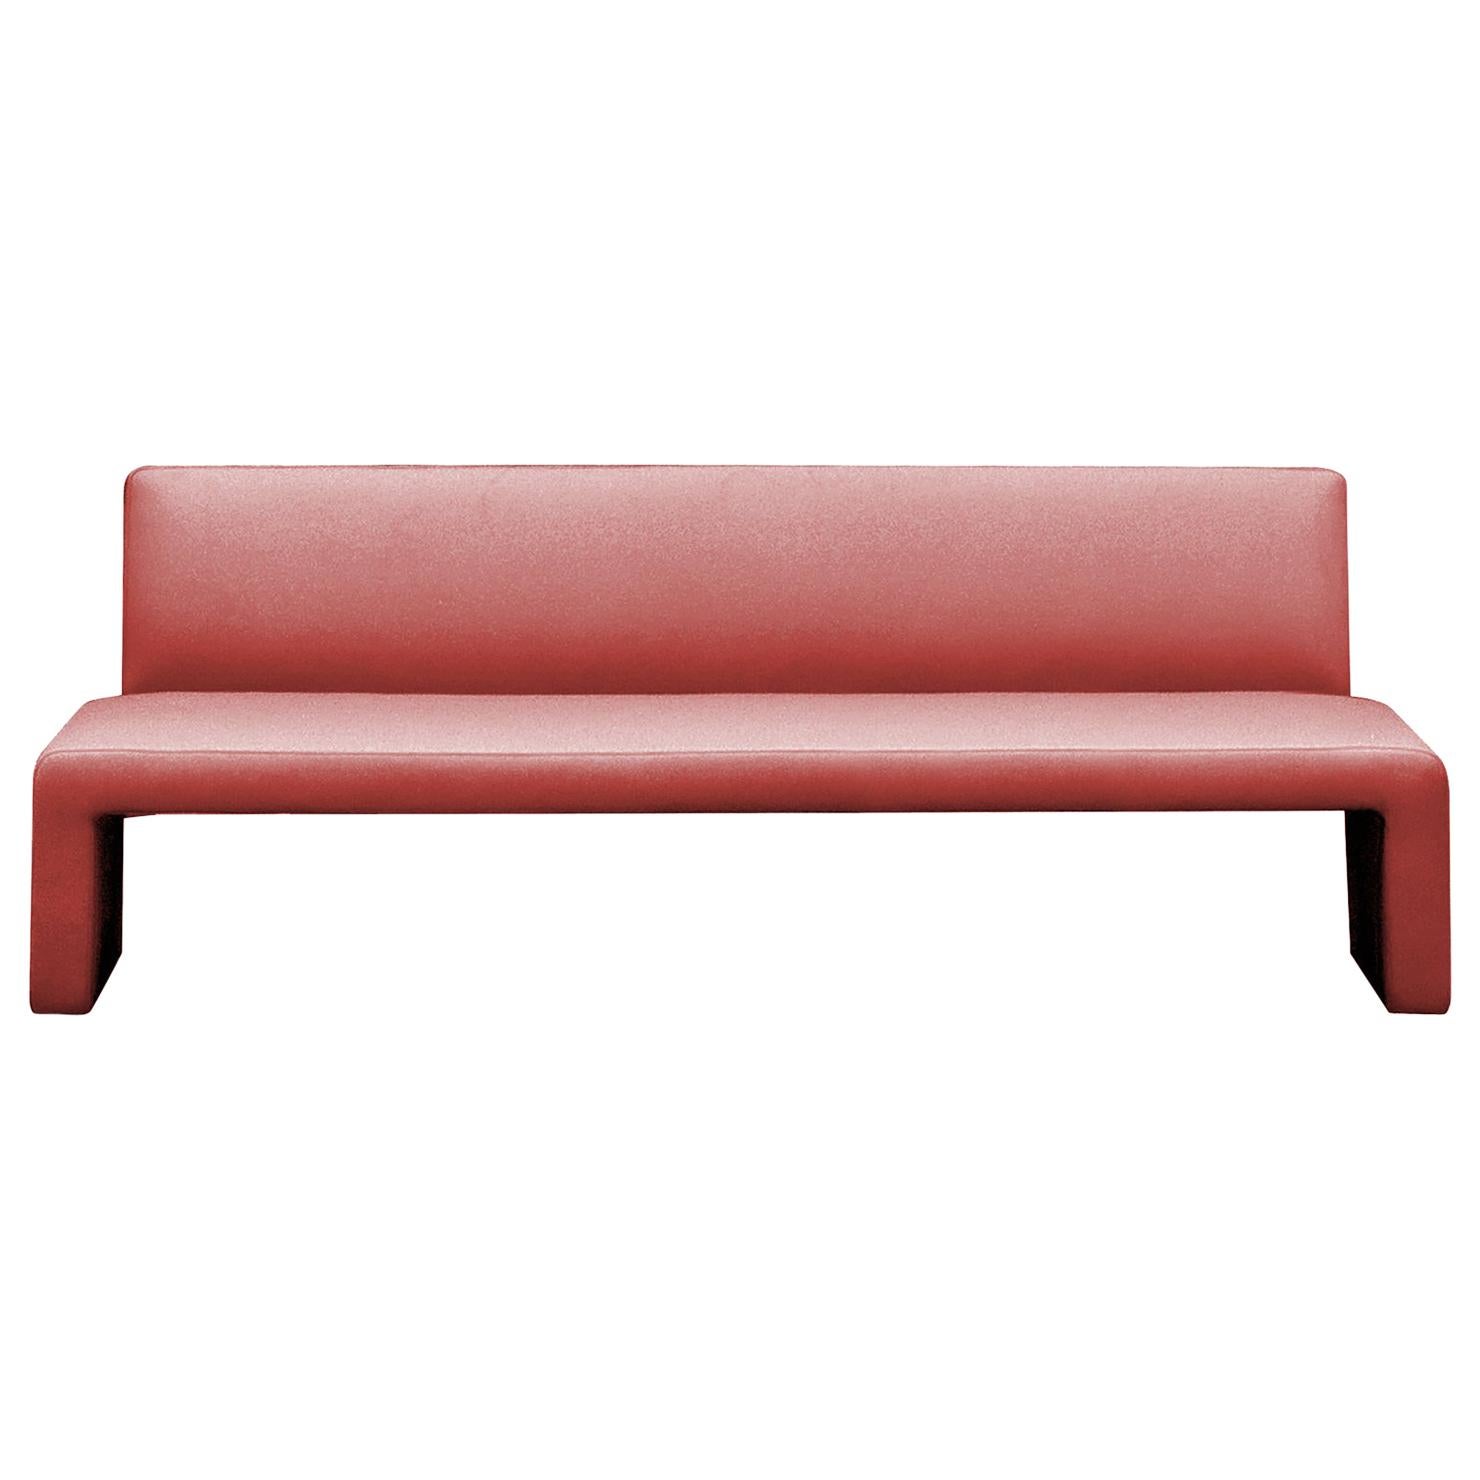 Customizable Tacchini Labanca Bench Designed by  Lievore Altherr Molina For Sale